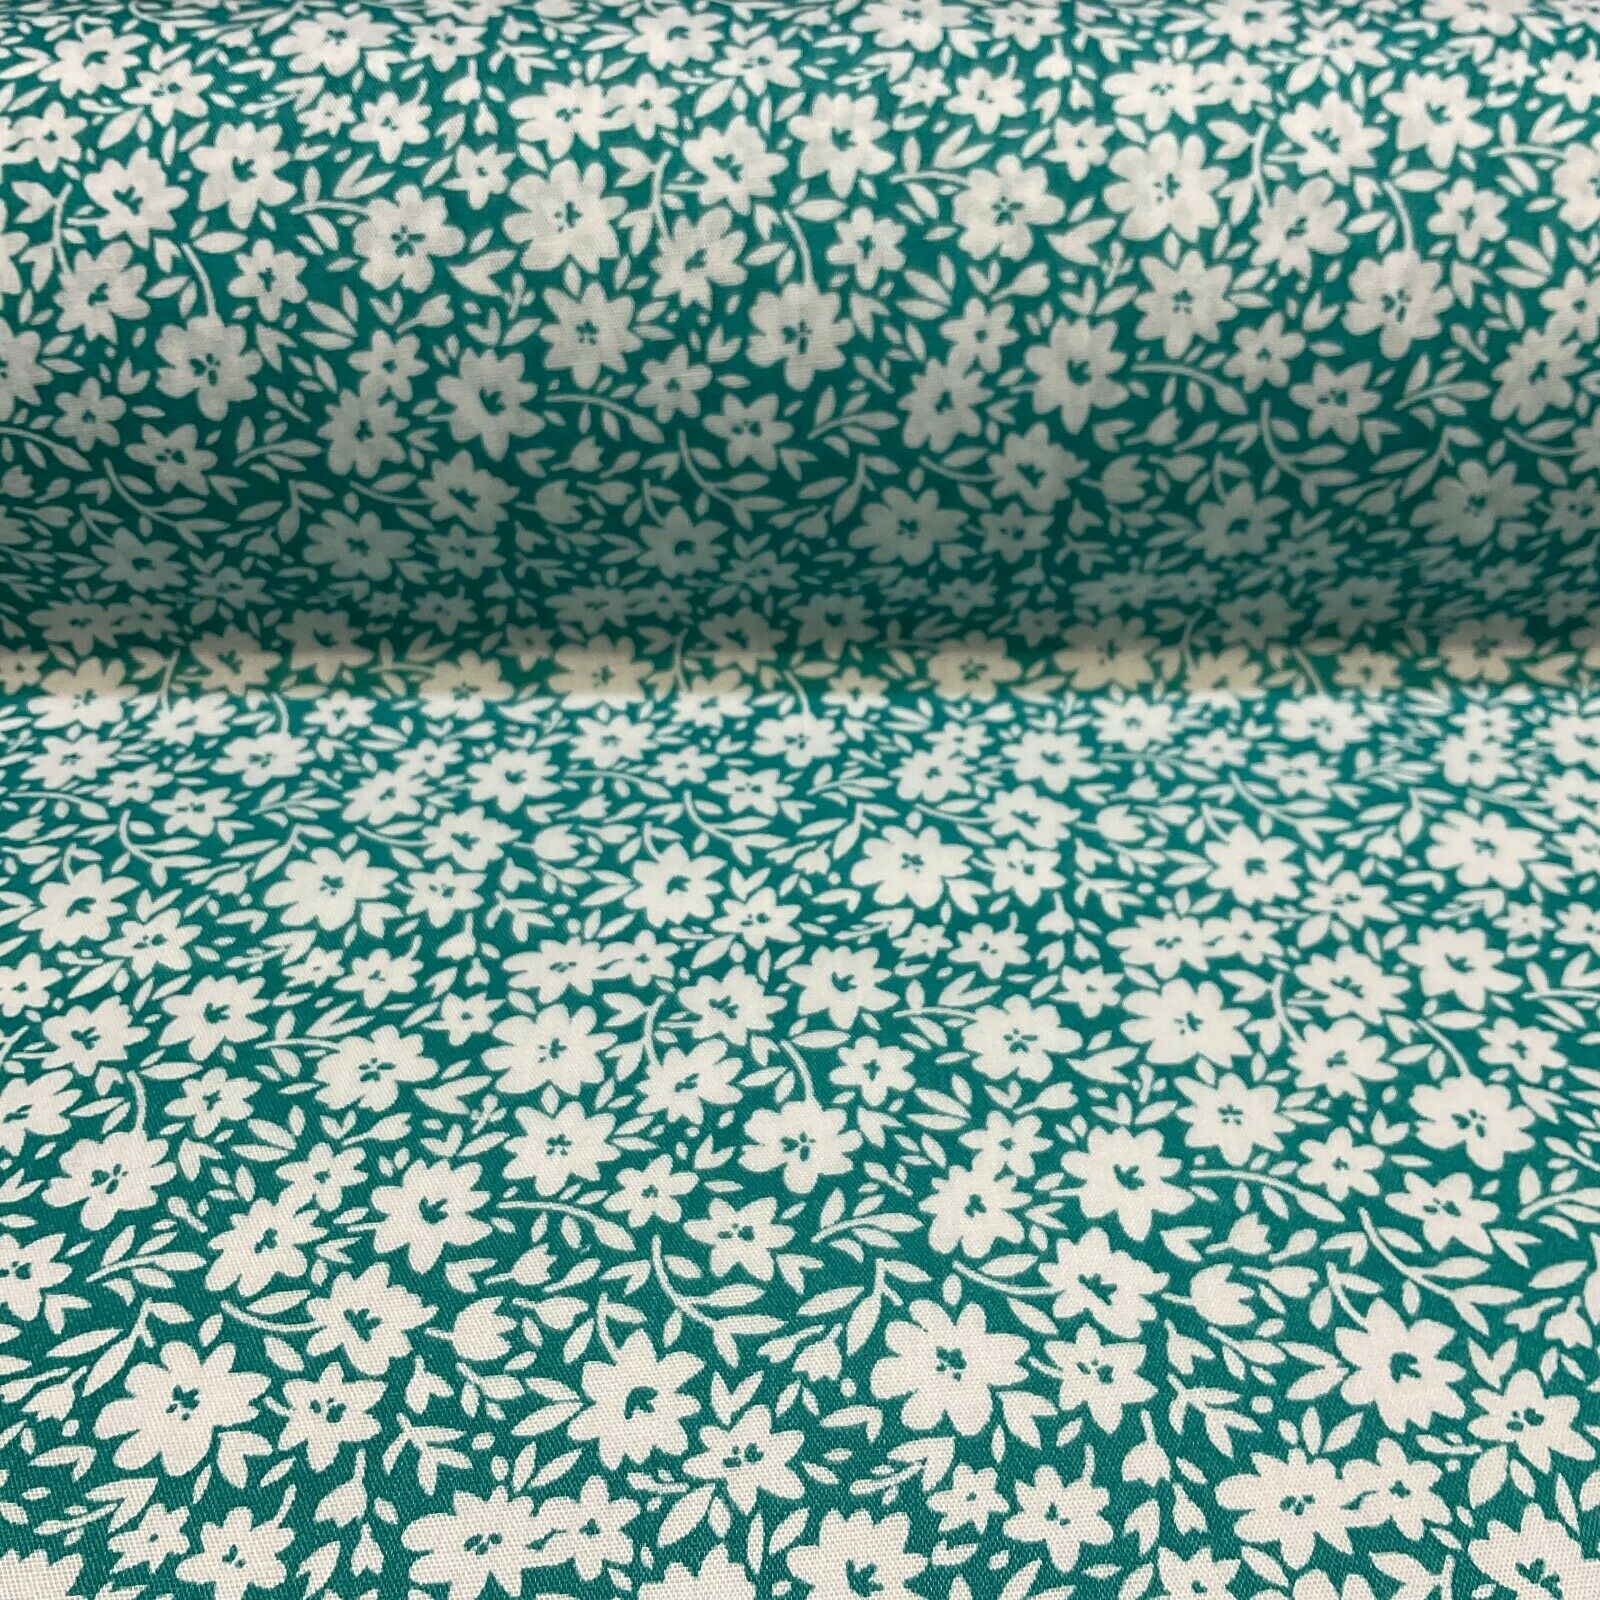 Small Floral ditsy Poly cotton printed lightweight fabric M1615